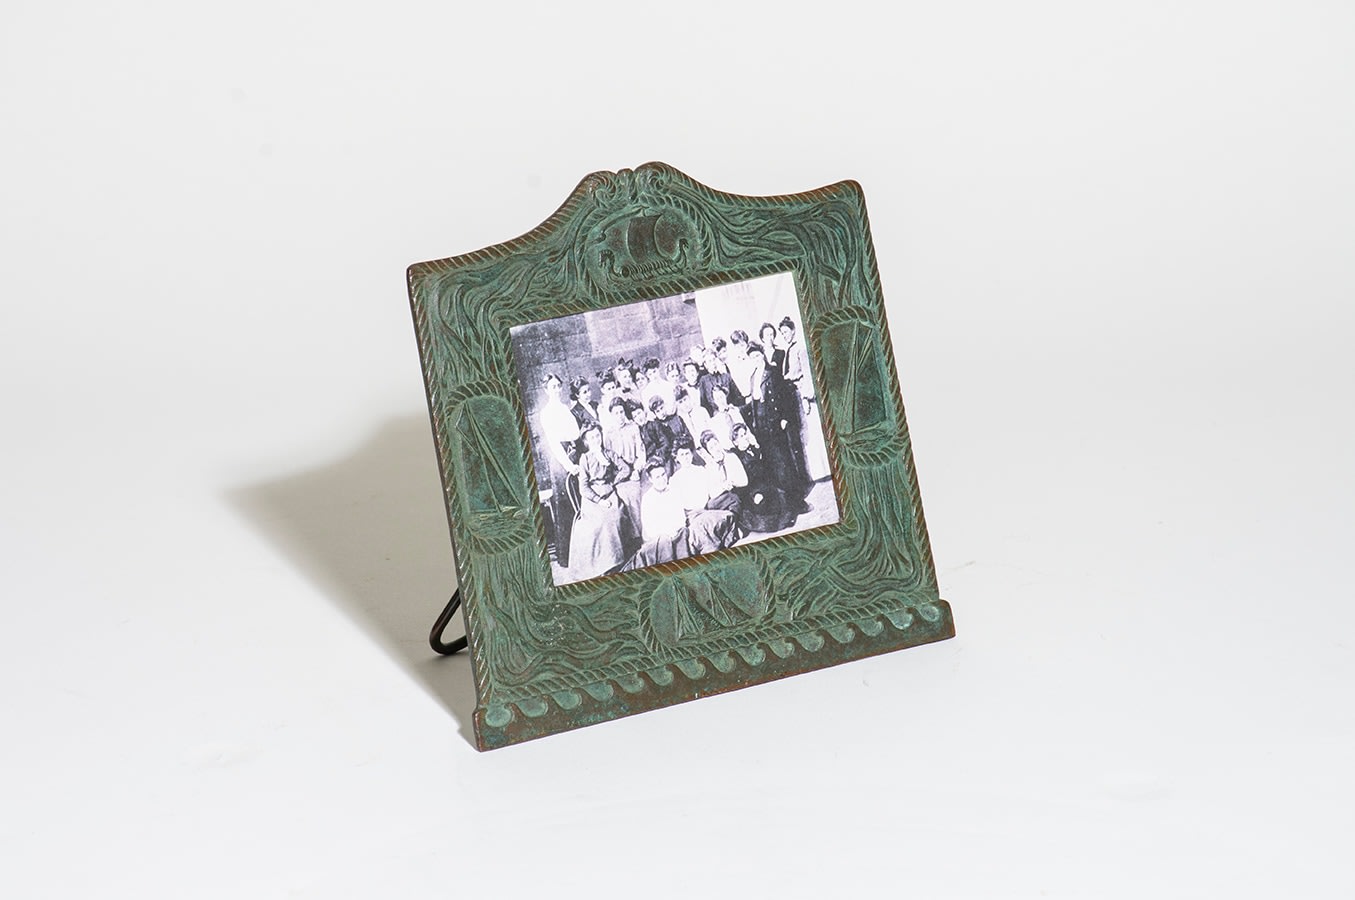 a low rectangular calendar frame from tiffany studios &quot;nautical&quot; desk set, the bronze in a green patina, the frame borders depicting maritime motifs including kelp, rope, and depictions of various sailing ships